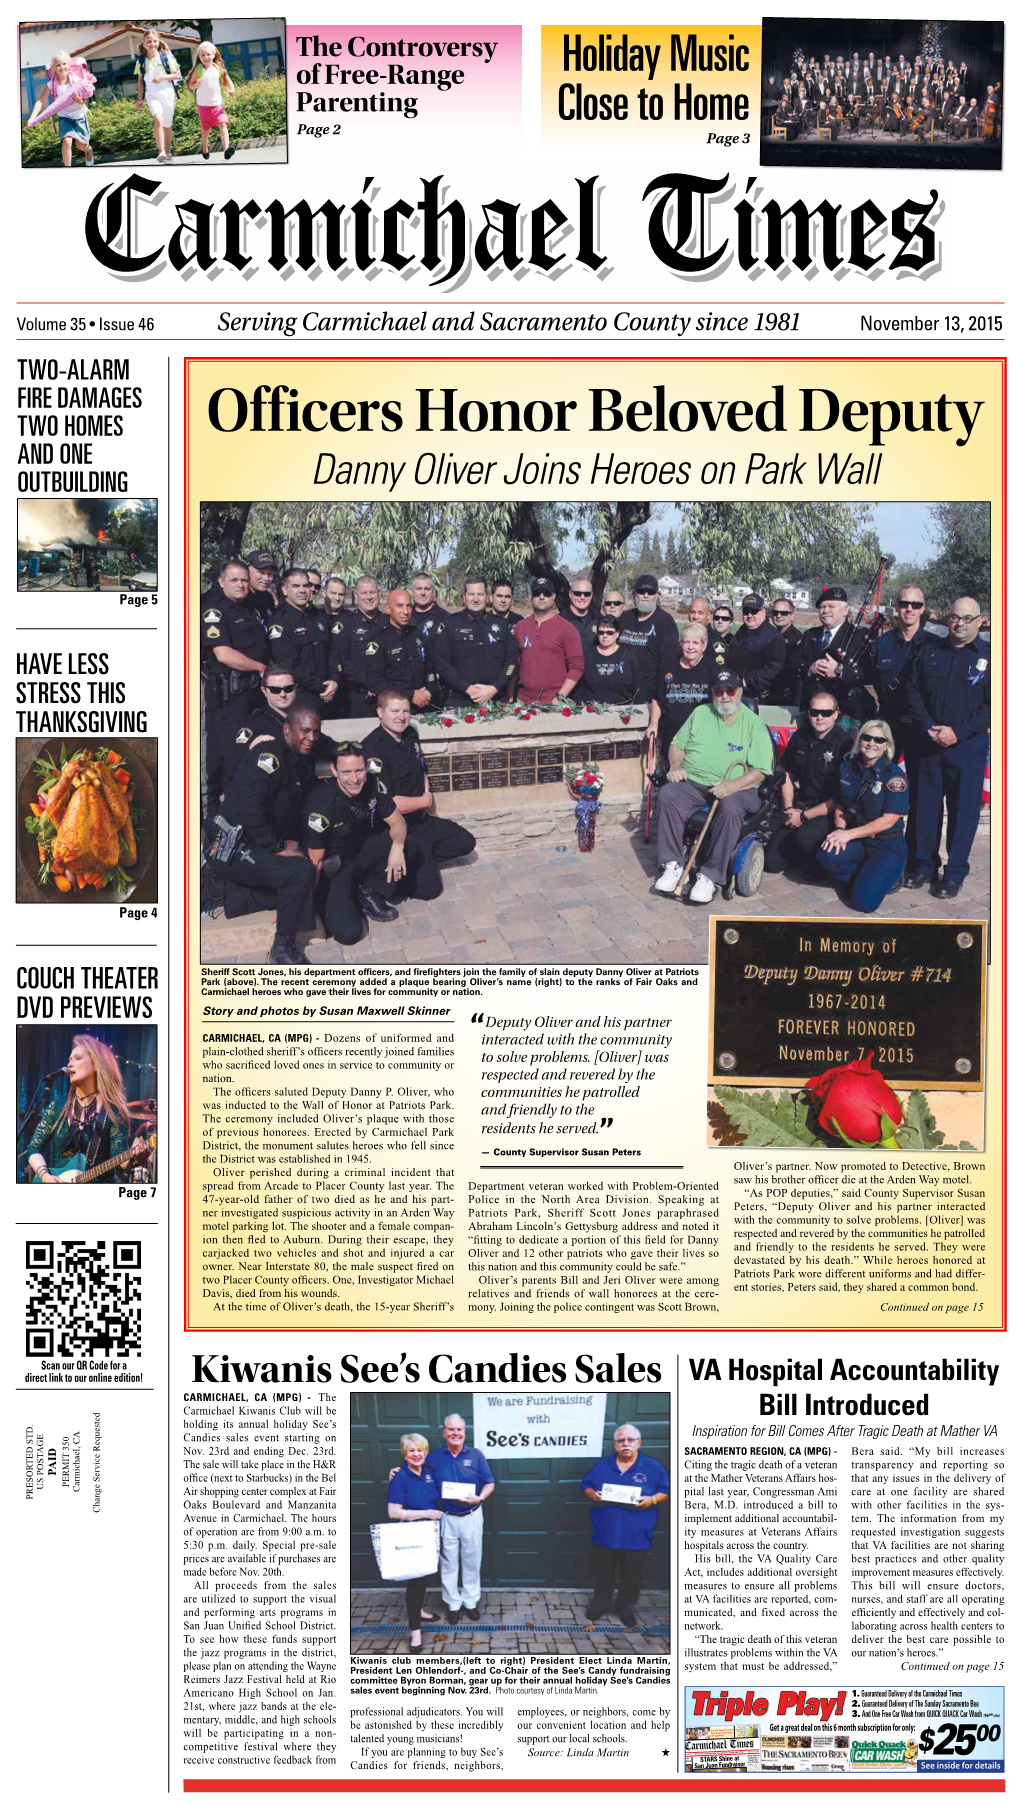 Officers Honor Beloved Deputy and ONE OUTBUILDING Danny Oliver Joins Heroes on Park Wall